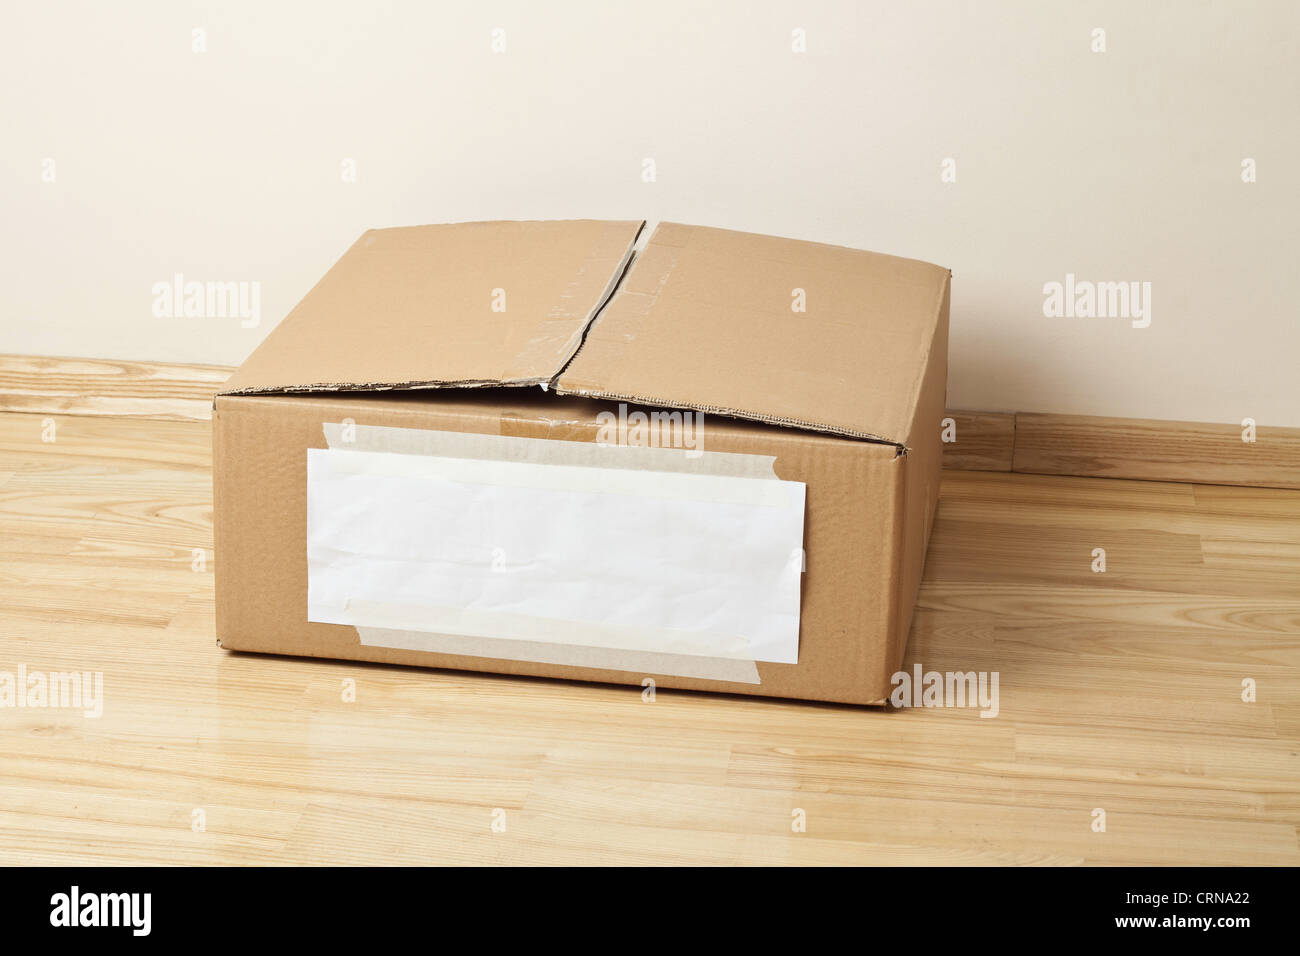 Cardboard box with blank label. Moving, storage concept. Stock Photo